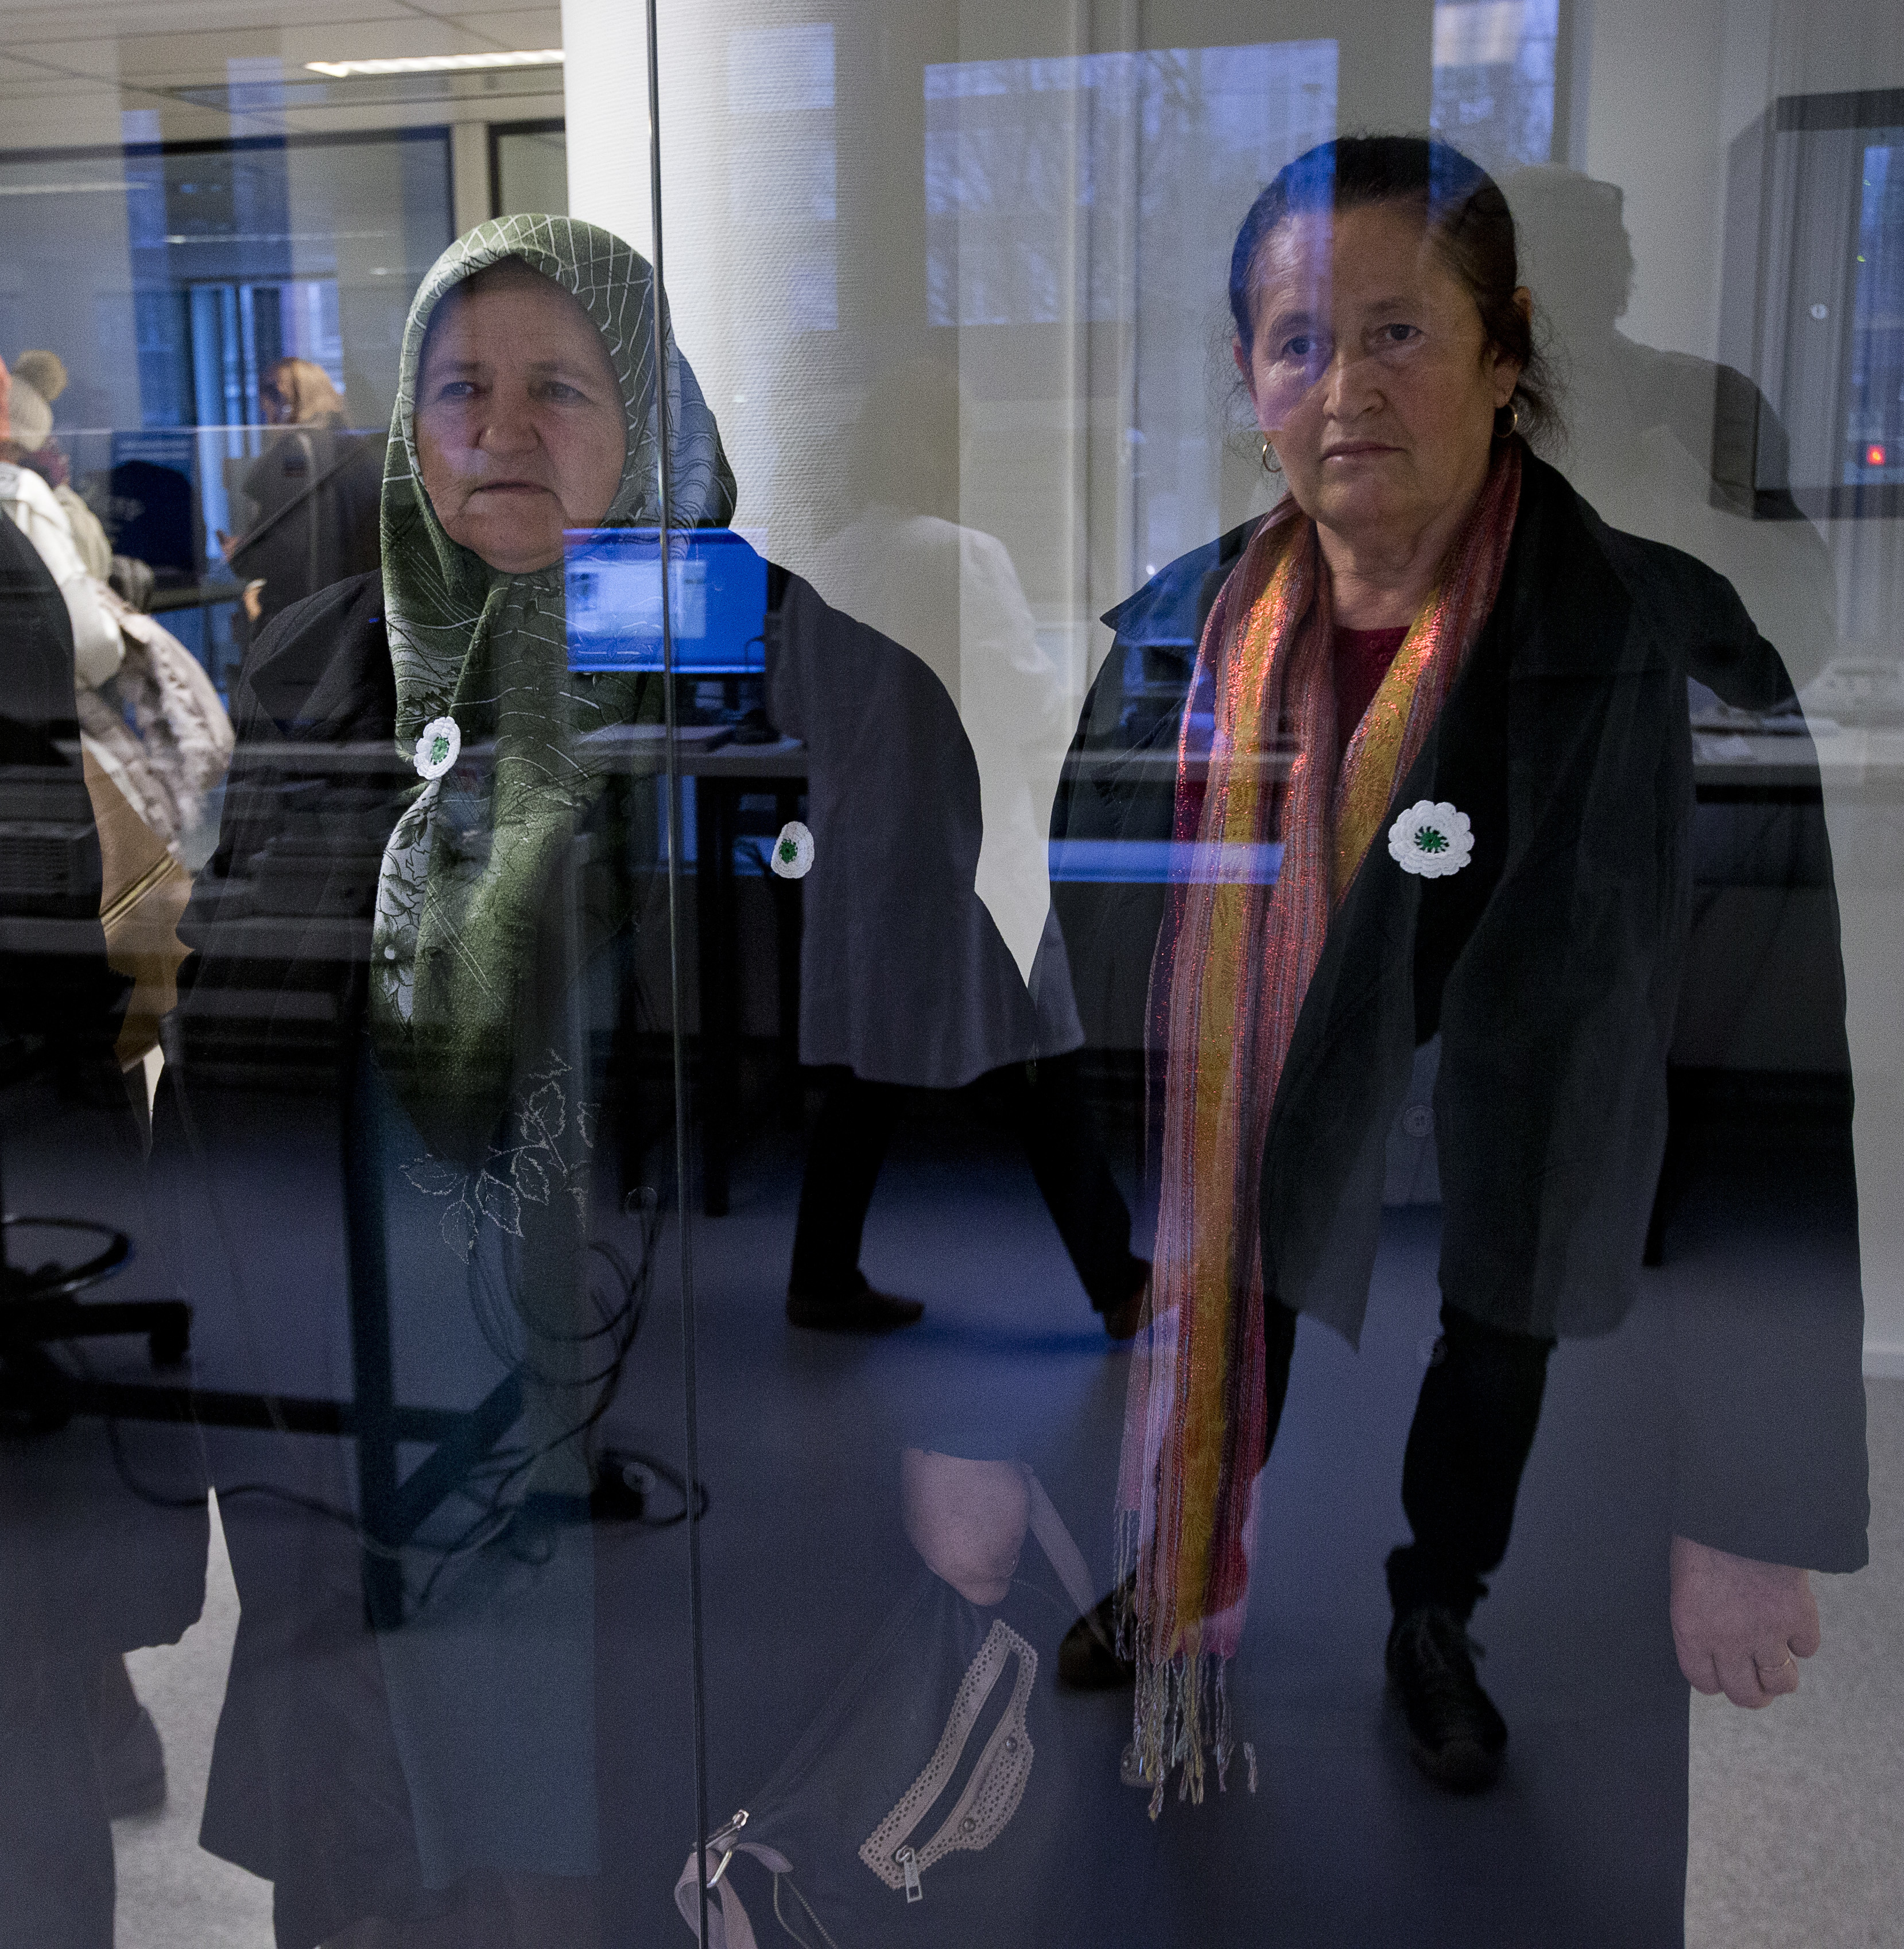 A delegation of the Mothers of Srebrenica and several other Bosnian organizations tour the DNA lab of the International Commission on Missing Persons, ICMP, in The Hague, Netherlands, Monday, Nov. 20, 2017, two days ahead of the verdict in the genocide trial against Bosnian Serb military chief Ratko Mladic at the Yugoslav War Crimes Tribunal. (AP Photo/Peter Dejong)